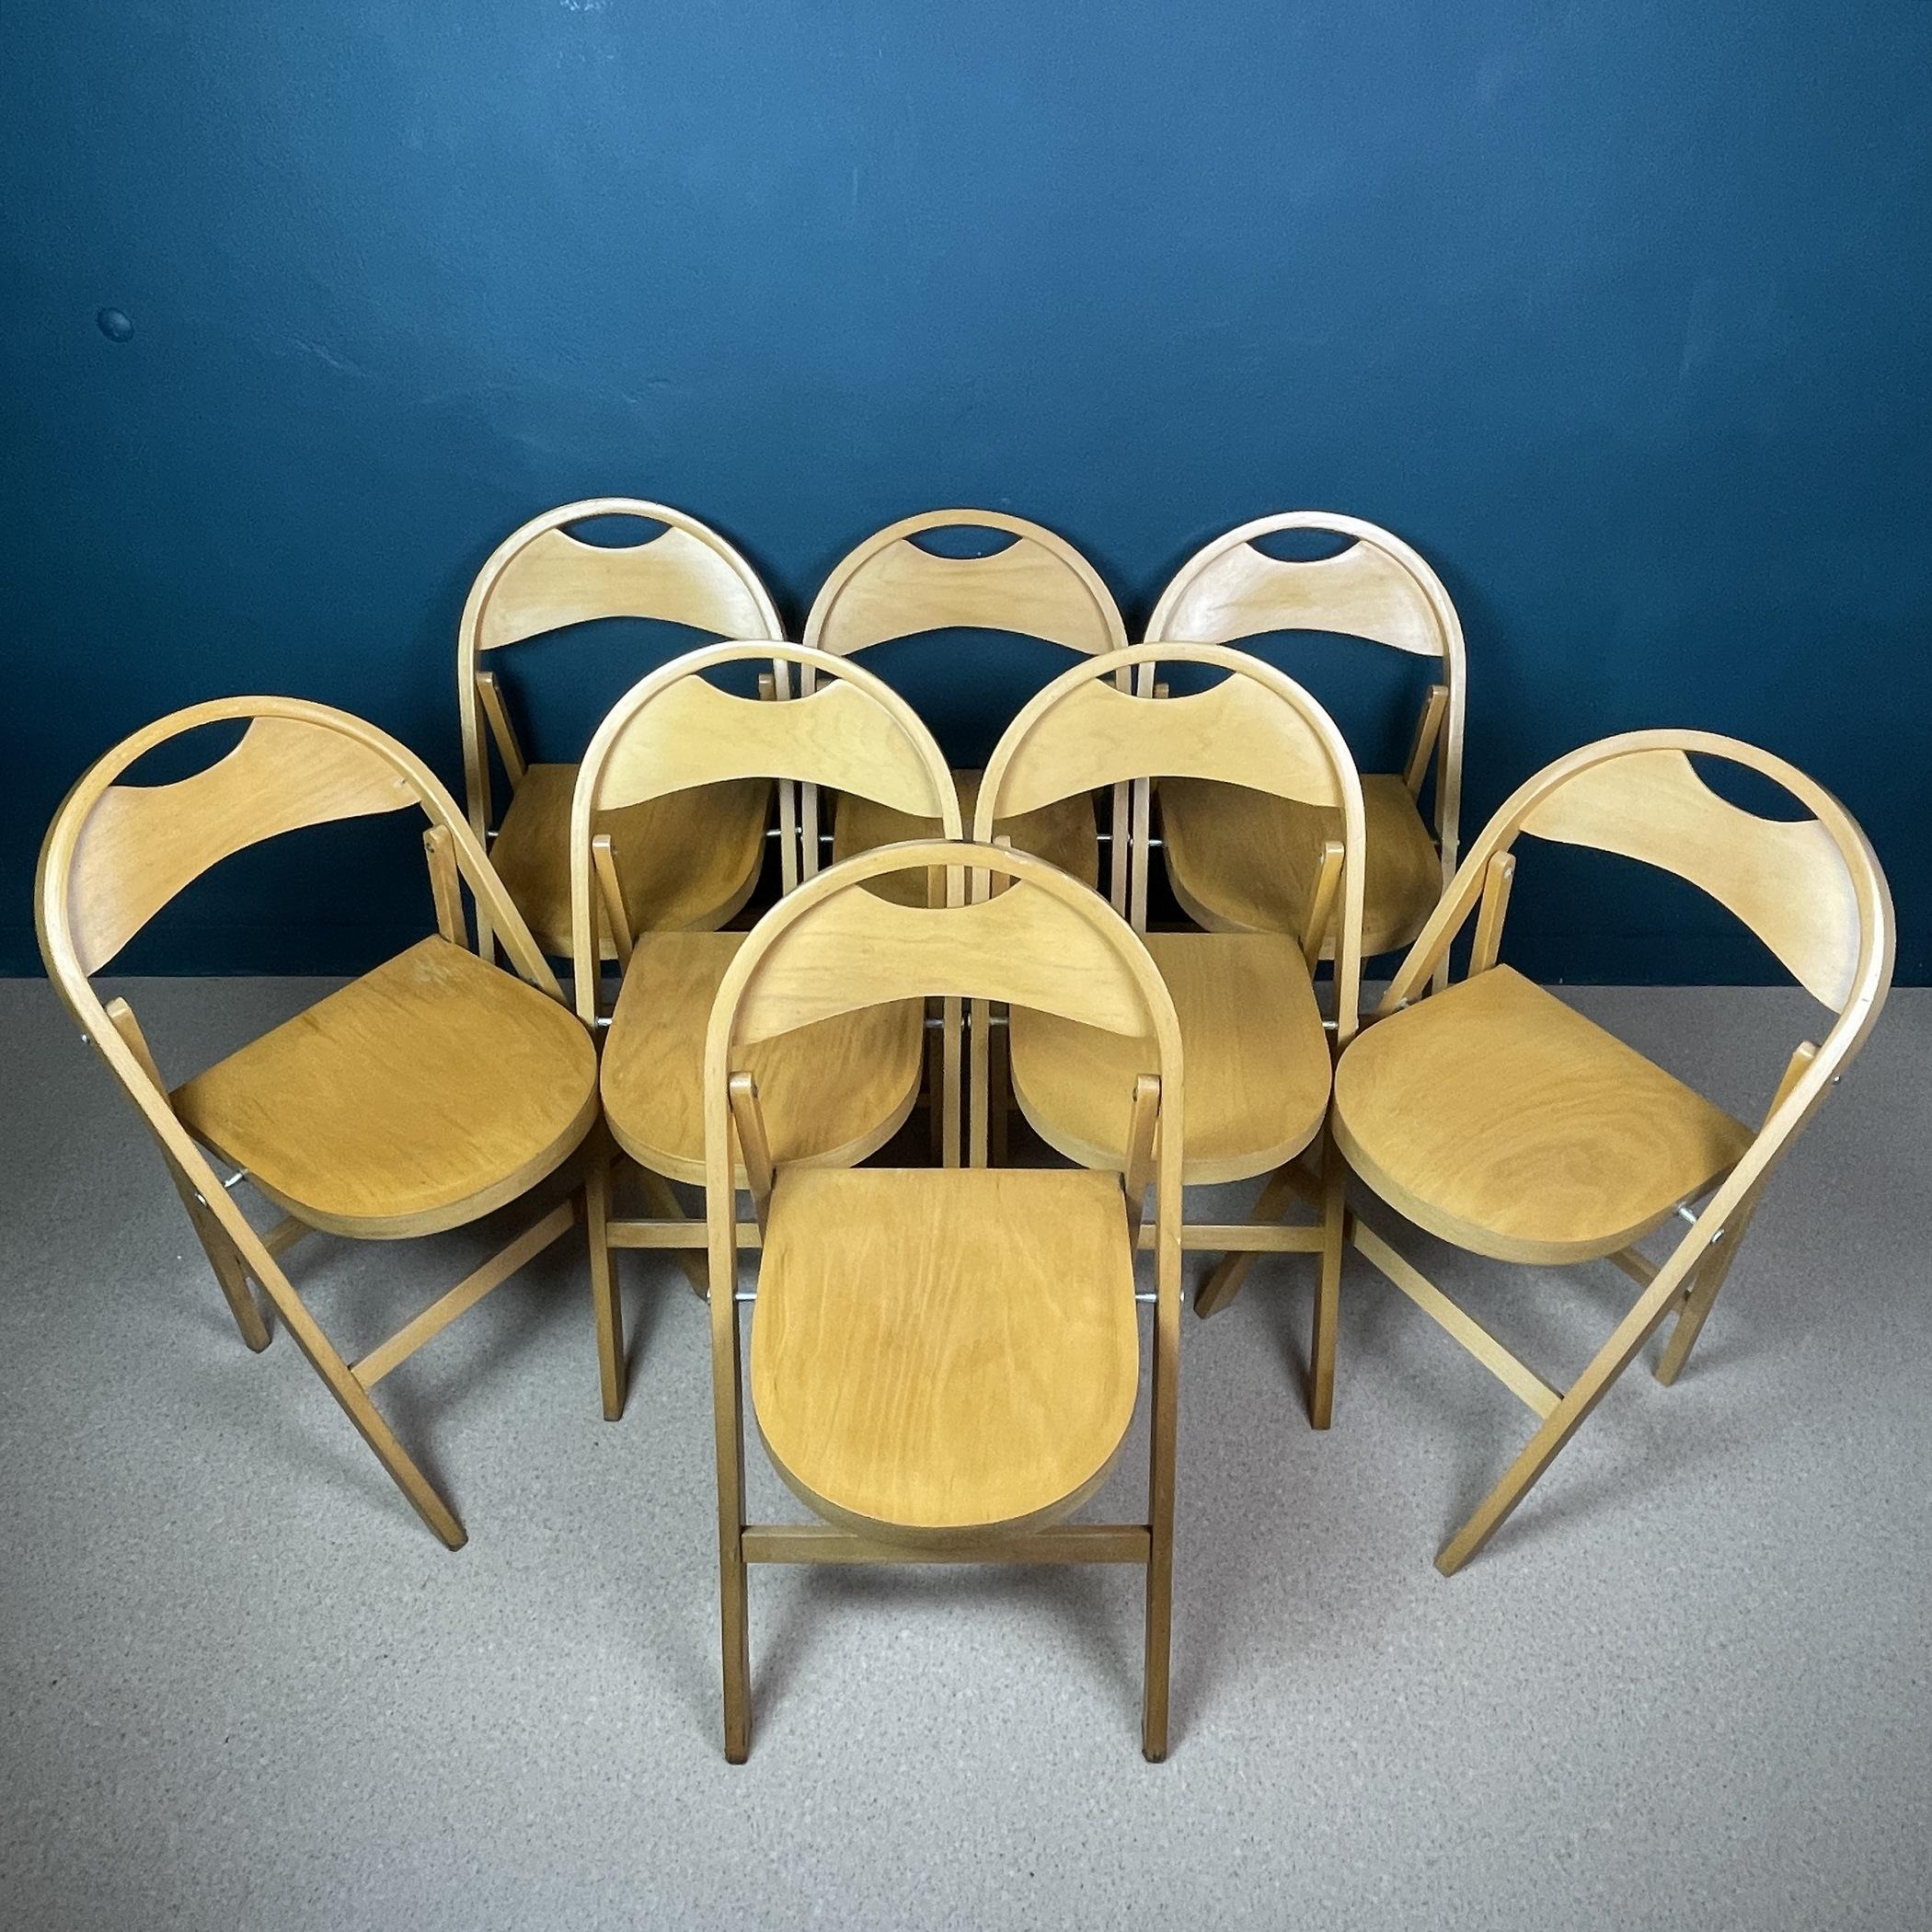 1 of 6 mid-century iconic folding chairs 